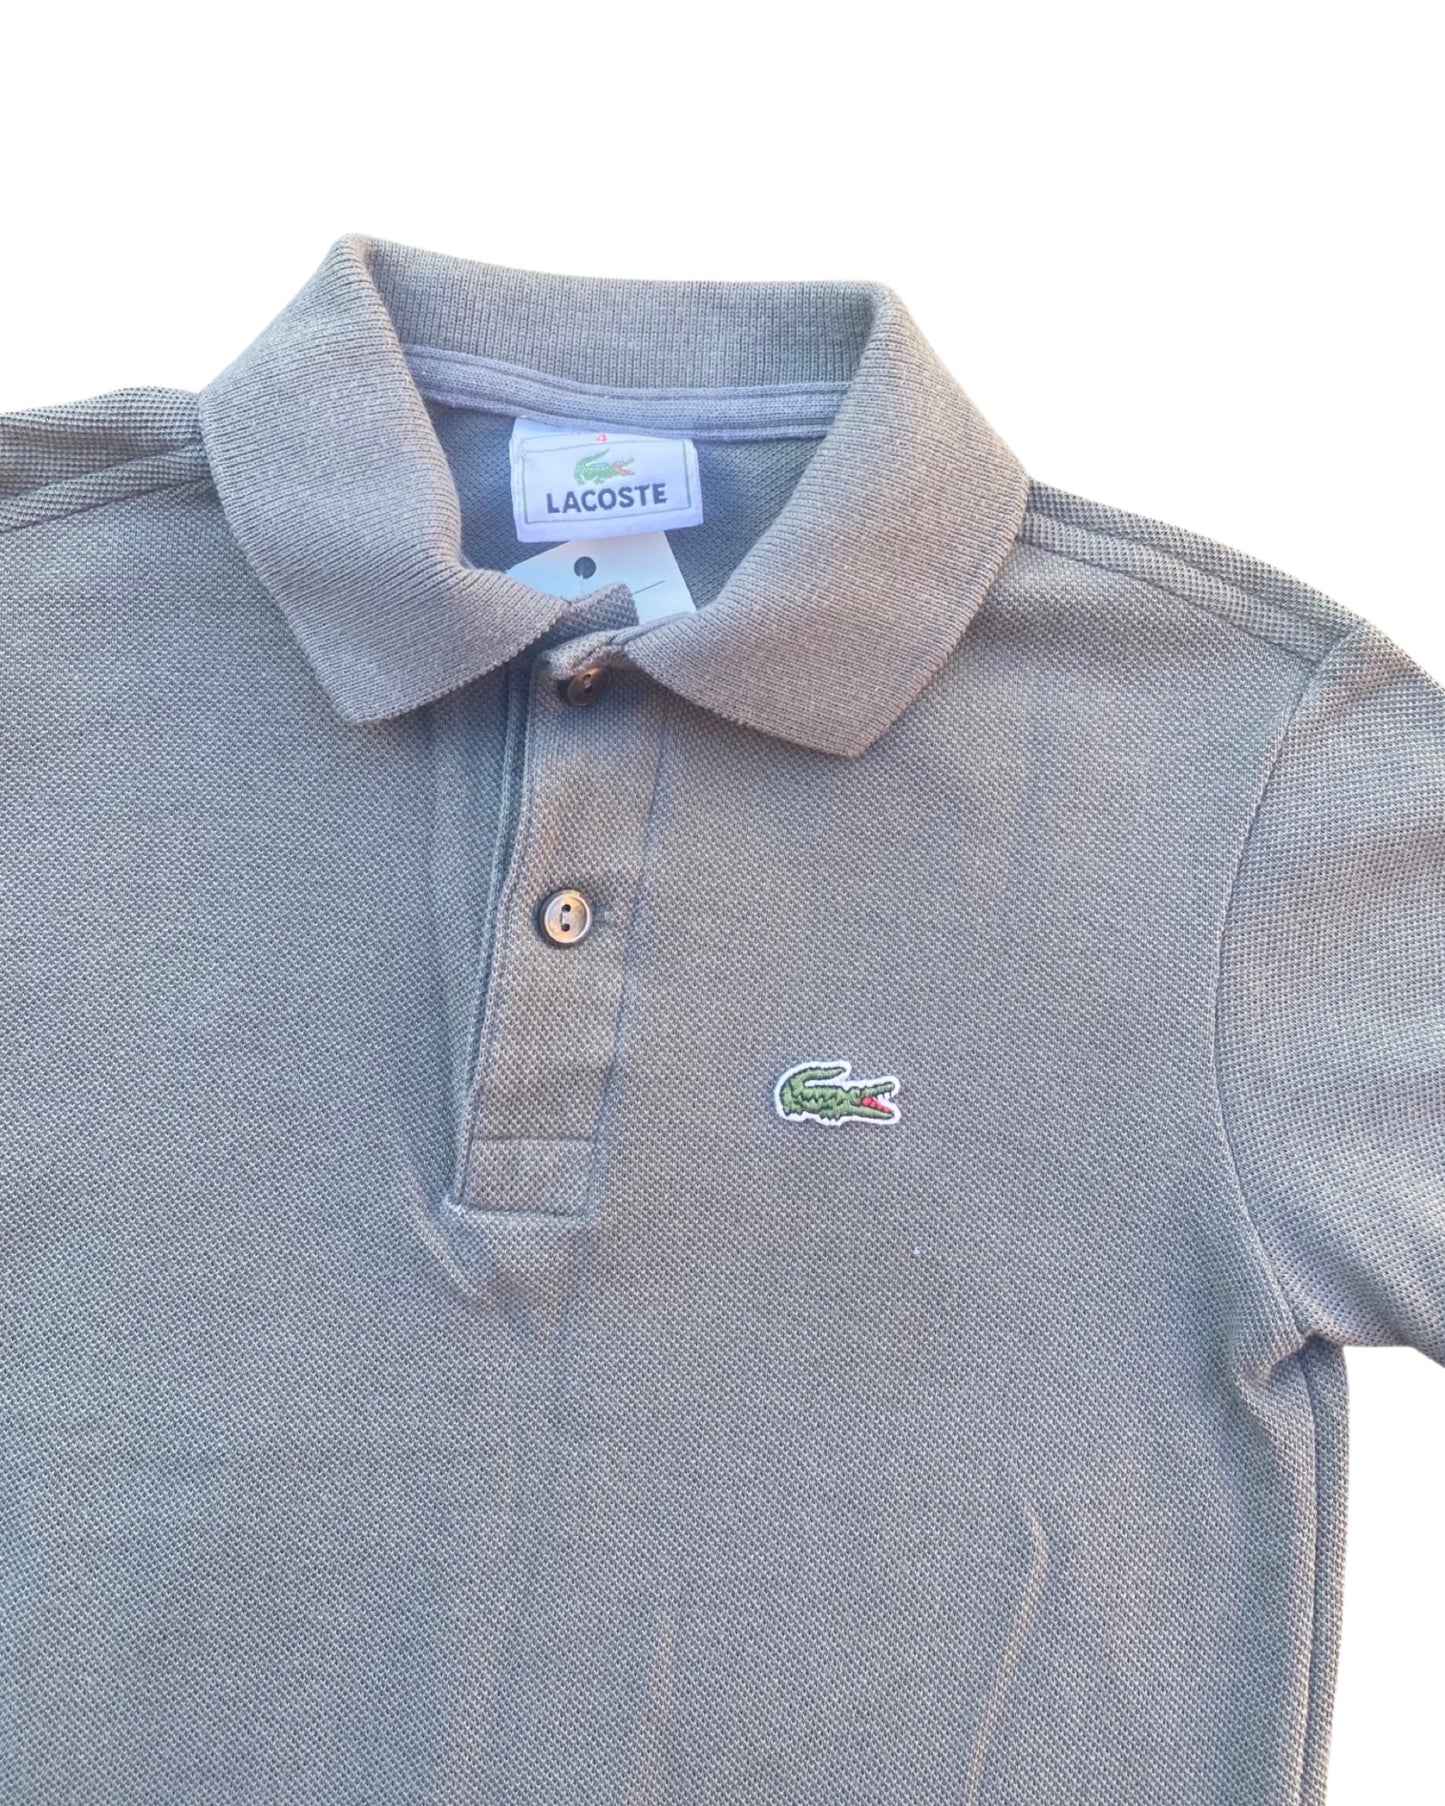 Lacoste short sleeved grey polo shirt (4yrs)